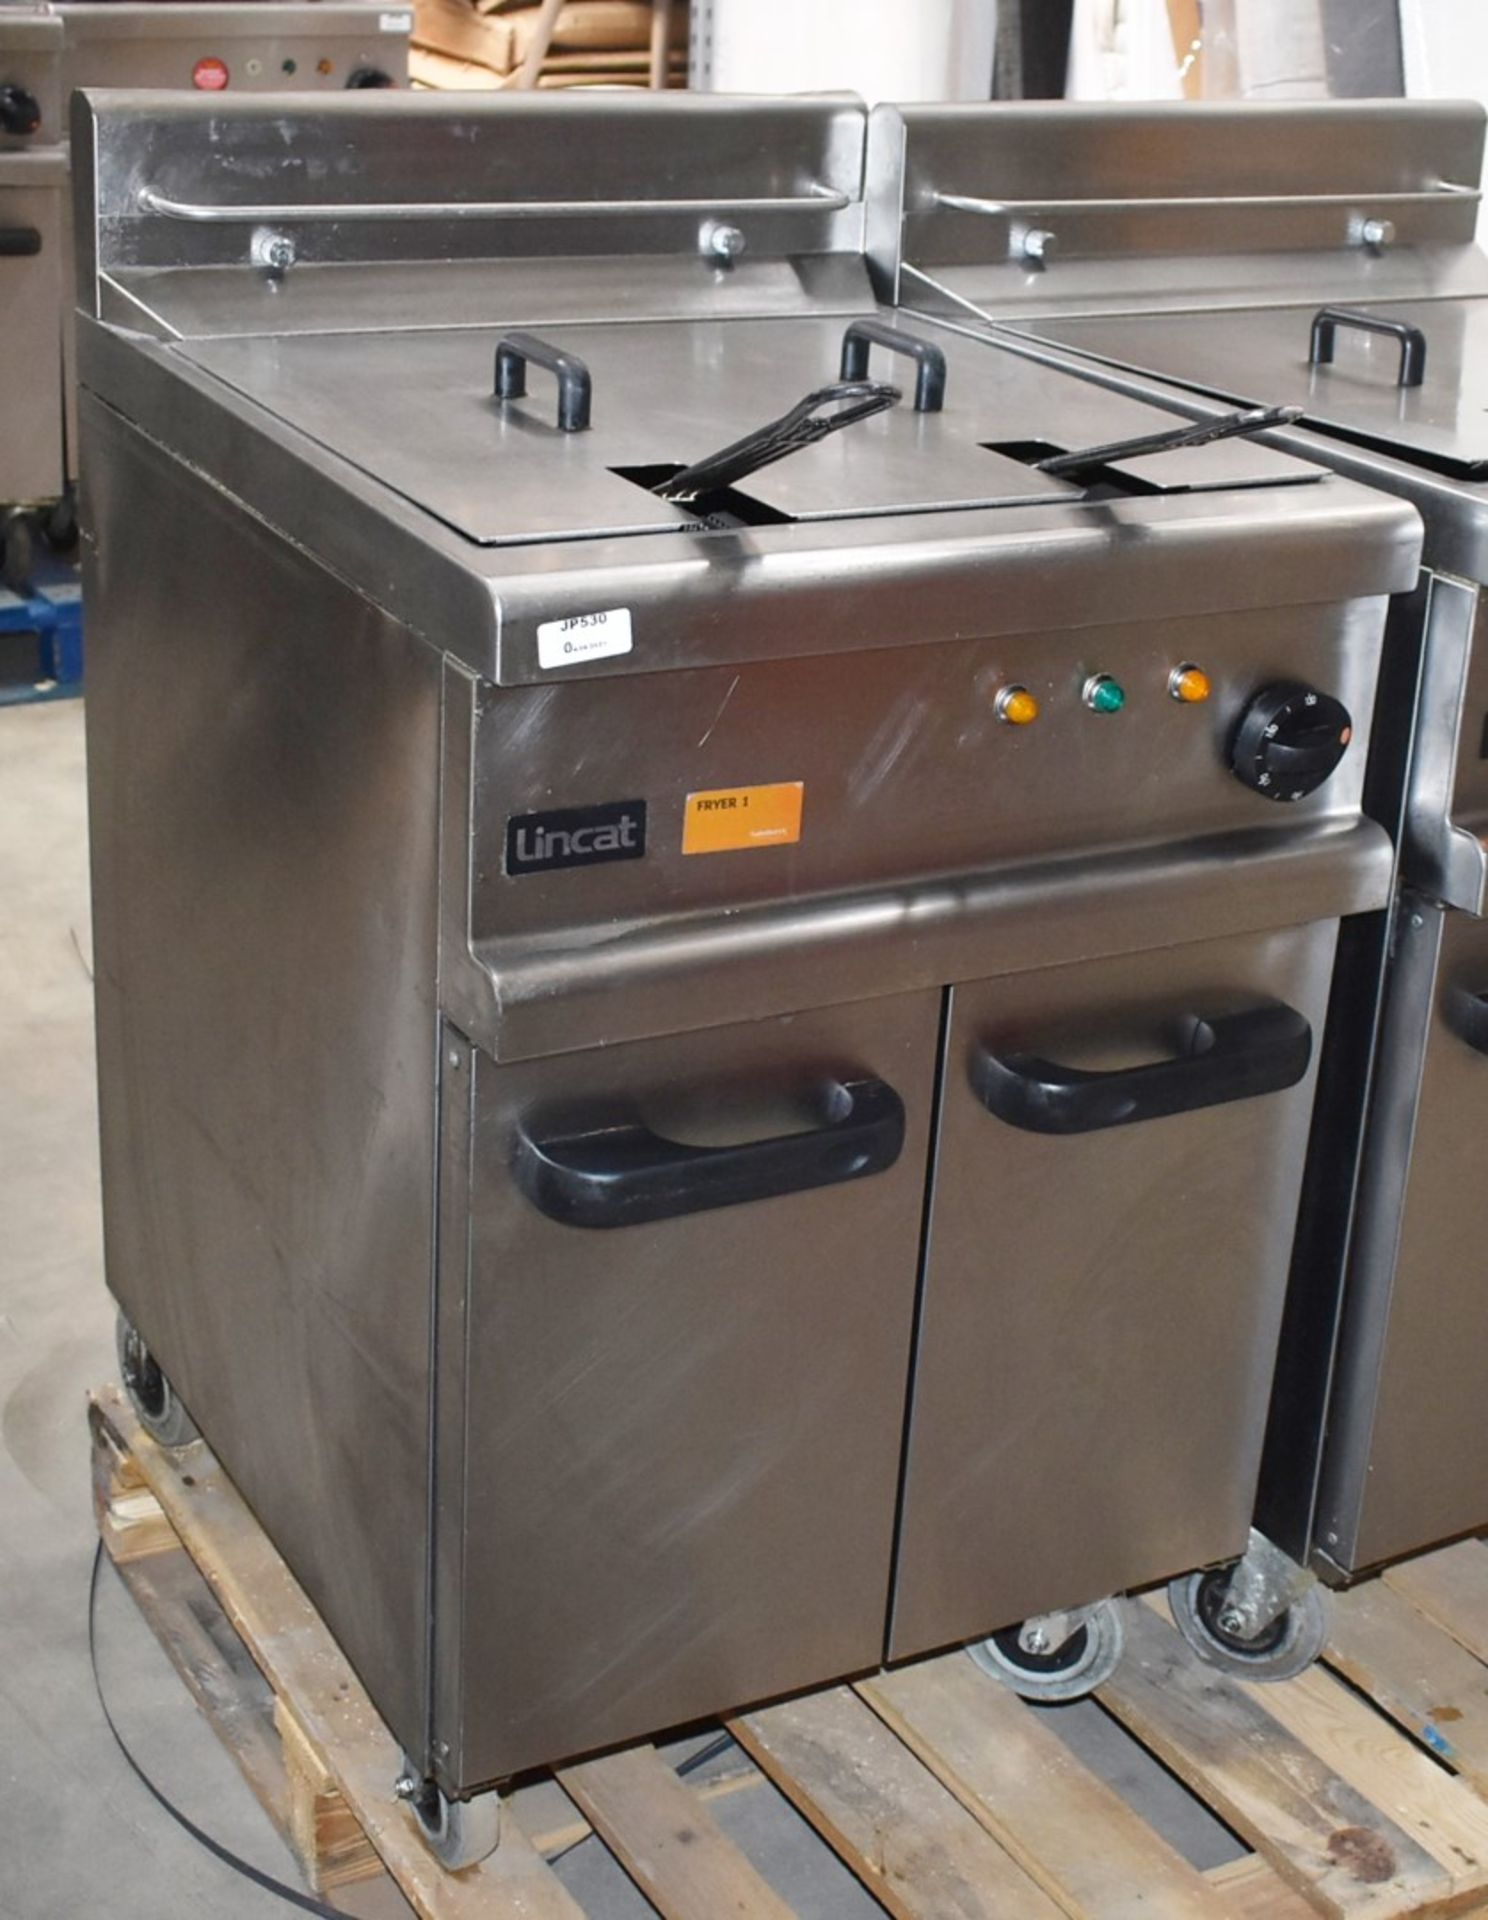 1 x Lincat Opus 700 OE7113 Single Large Tank Electric Fryer With Built In Filteration - 240V / 3PH - Image 6 of 8